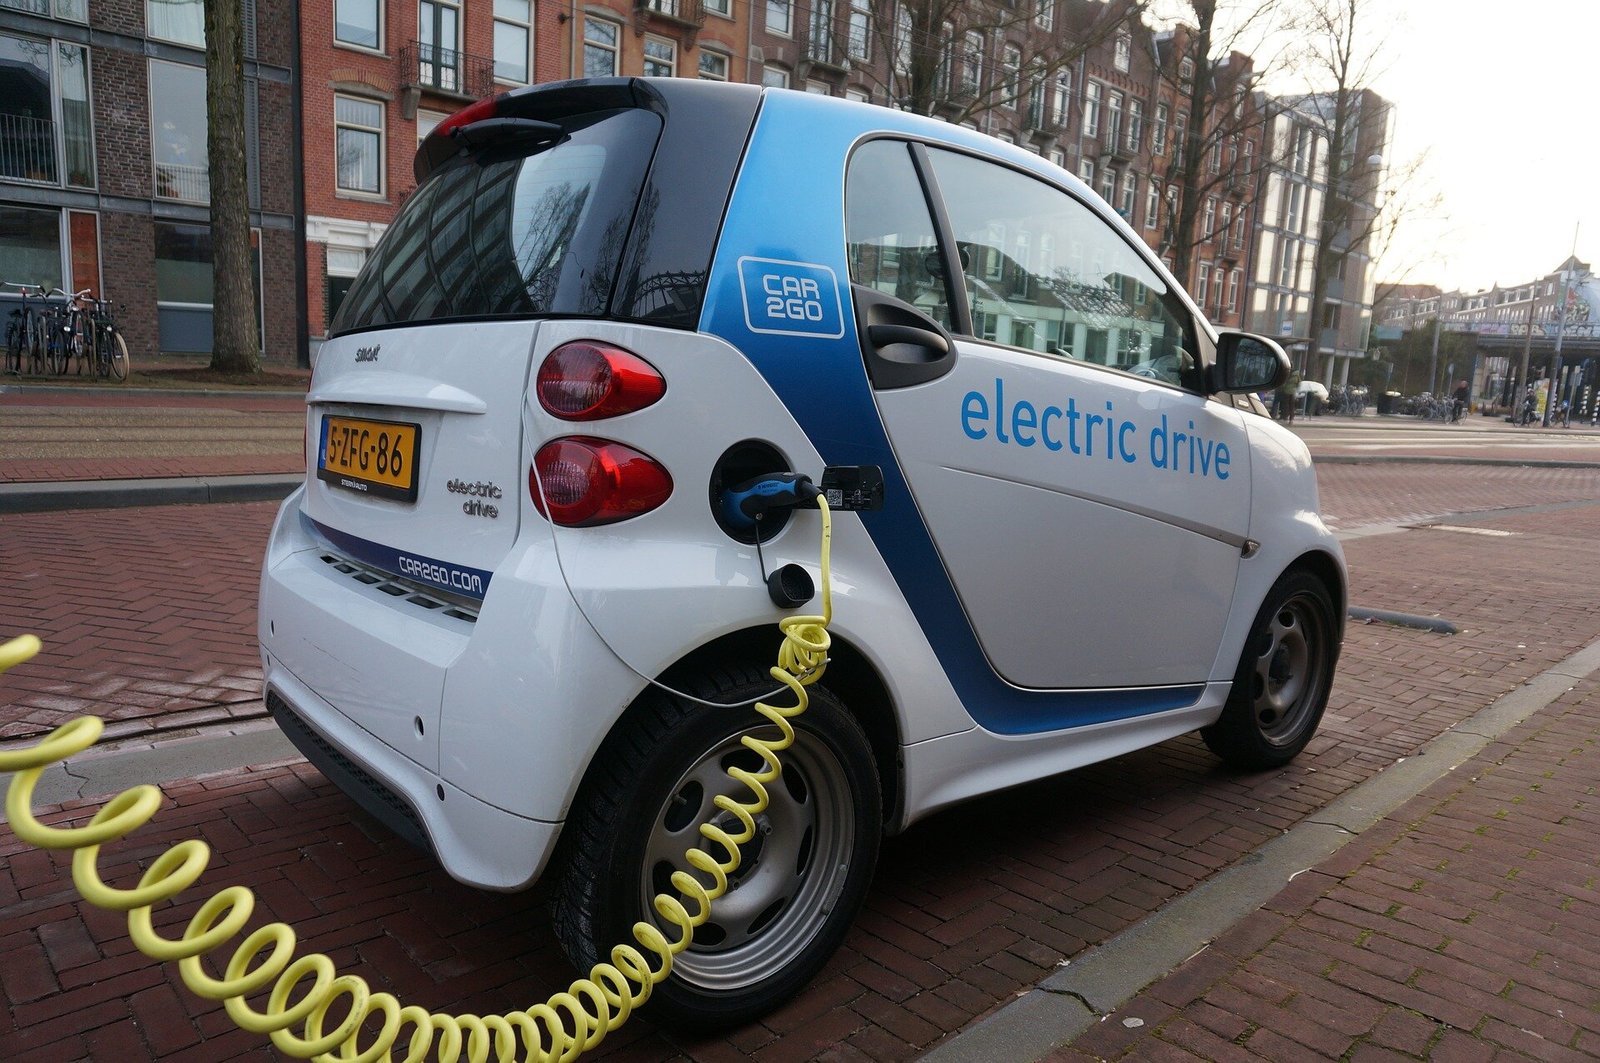 Pedestrians may be twice as likely to be hit by electrichybrid cars as petroldiesel ones